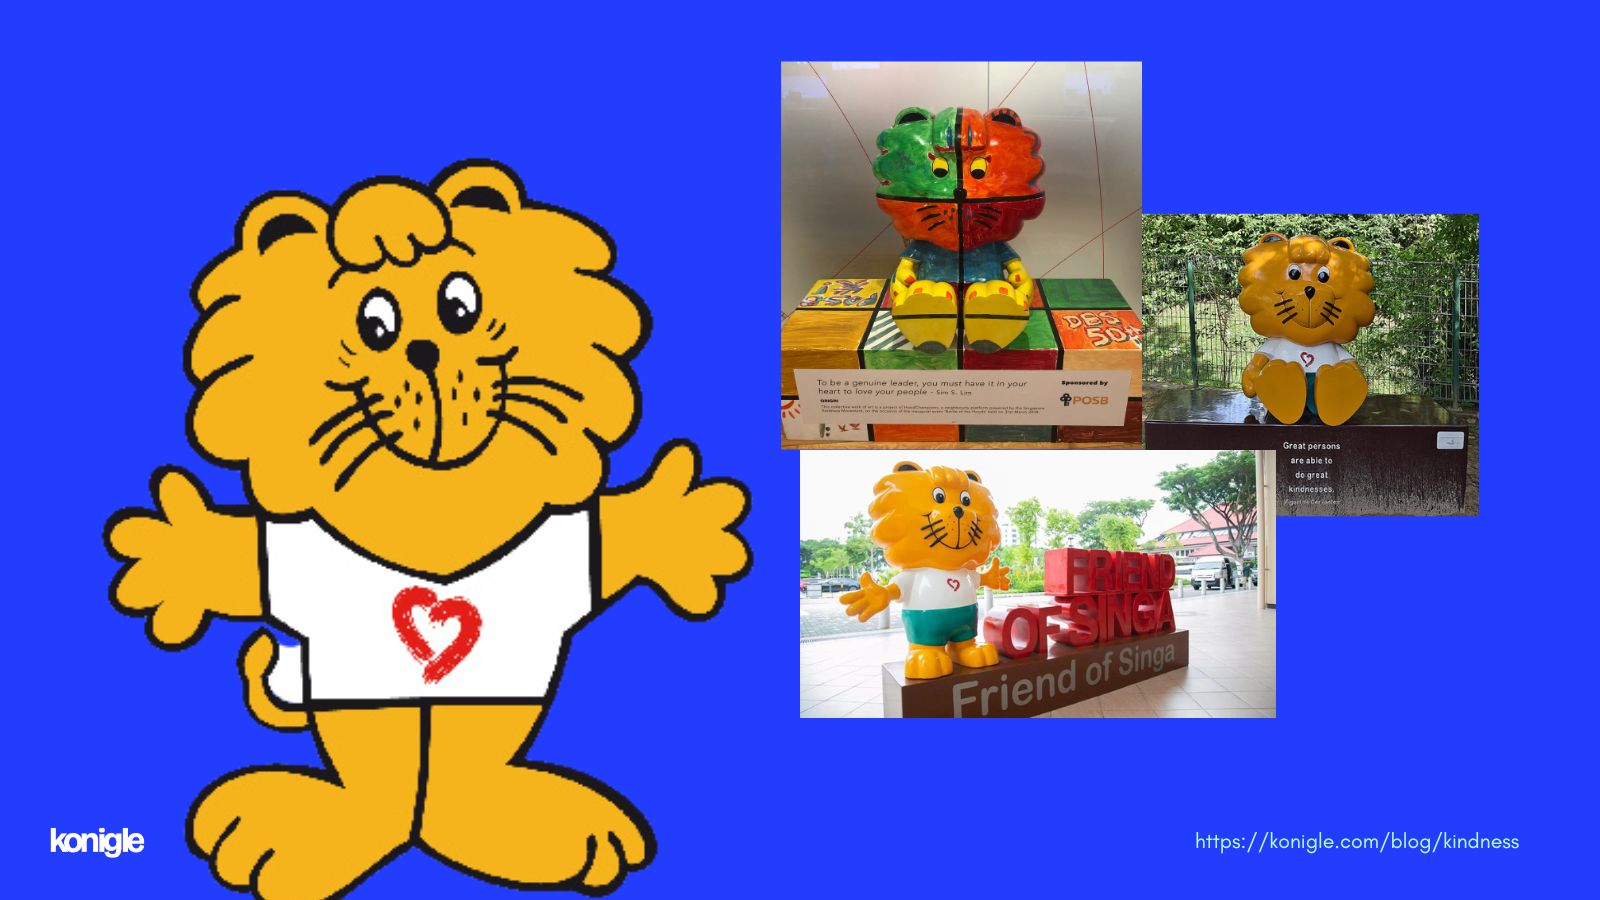 Singa the Kindness lion, the mascot for the Singapore Kindness Movement finds its life size statues at various places in Singapore.